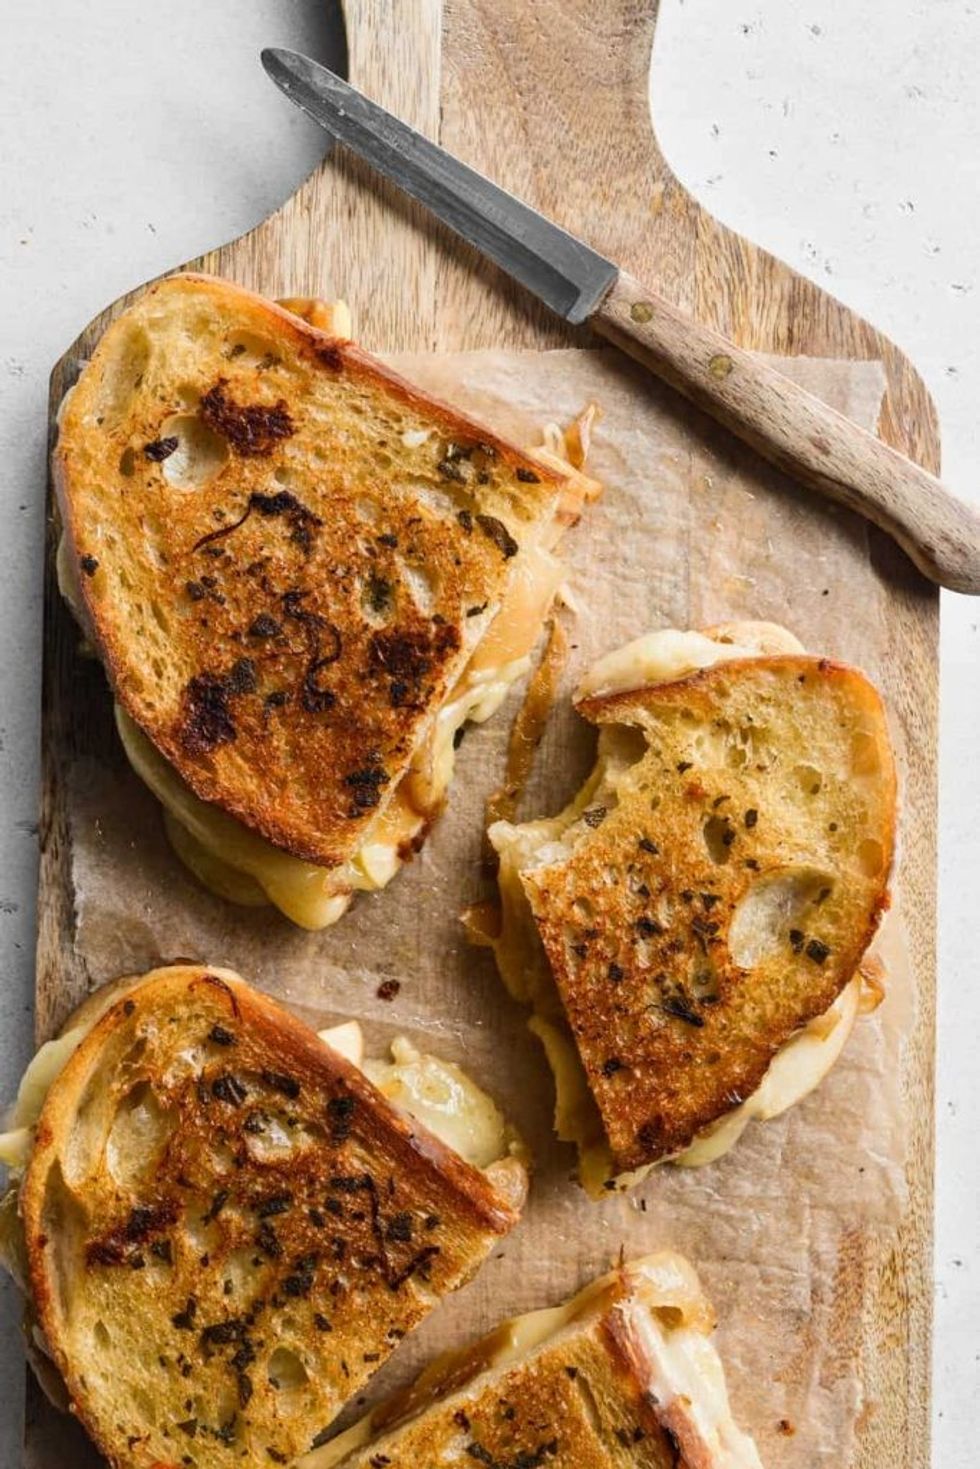 Caramelized Onions & Apple Grilled Cheese Sandwich